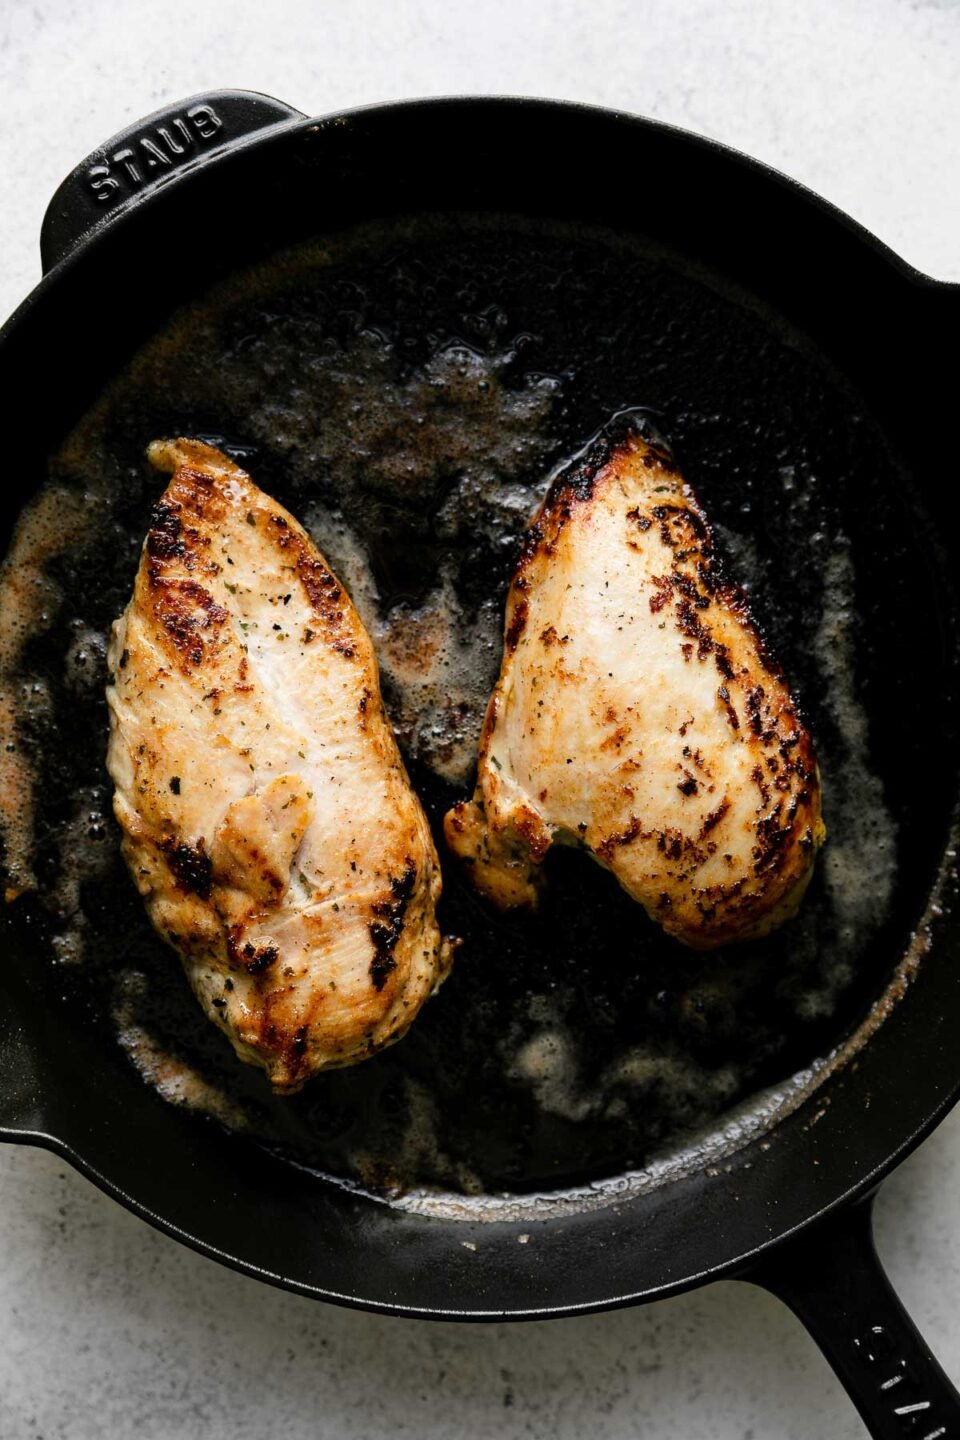 Two boneless, skinless chicken breasts are seared in butter in a black Staub cast iron skillet. The skillet sits atop a creamy white textured surface.